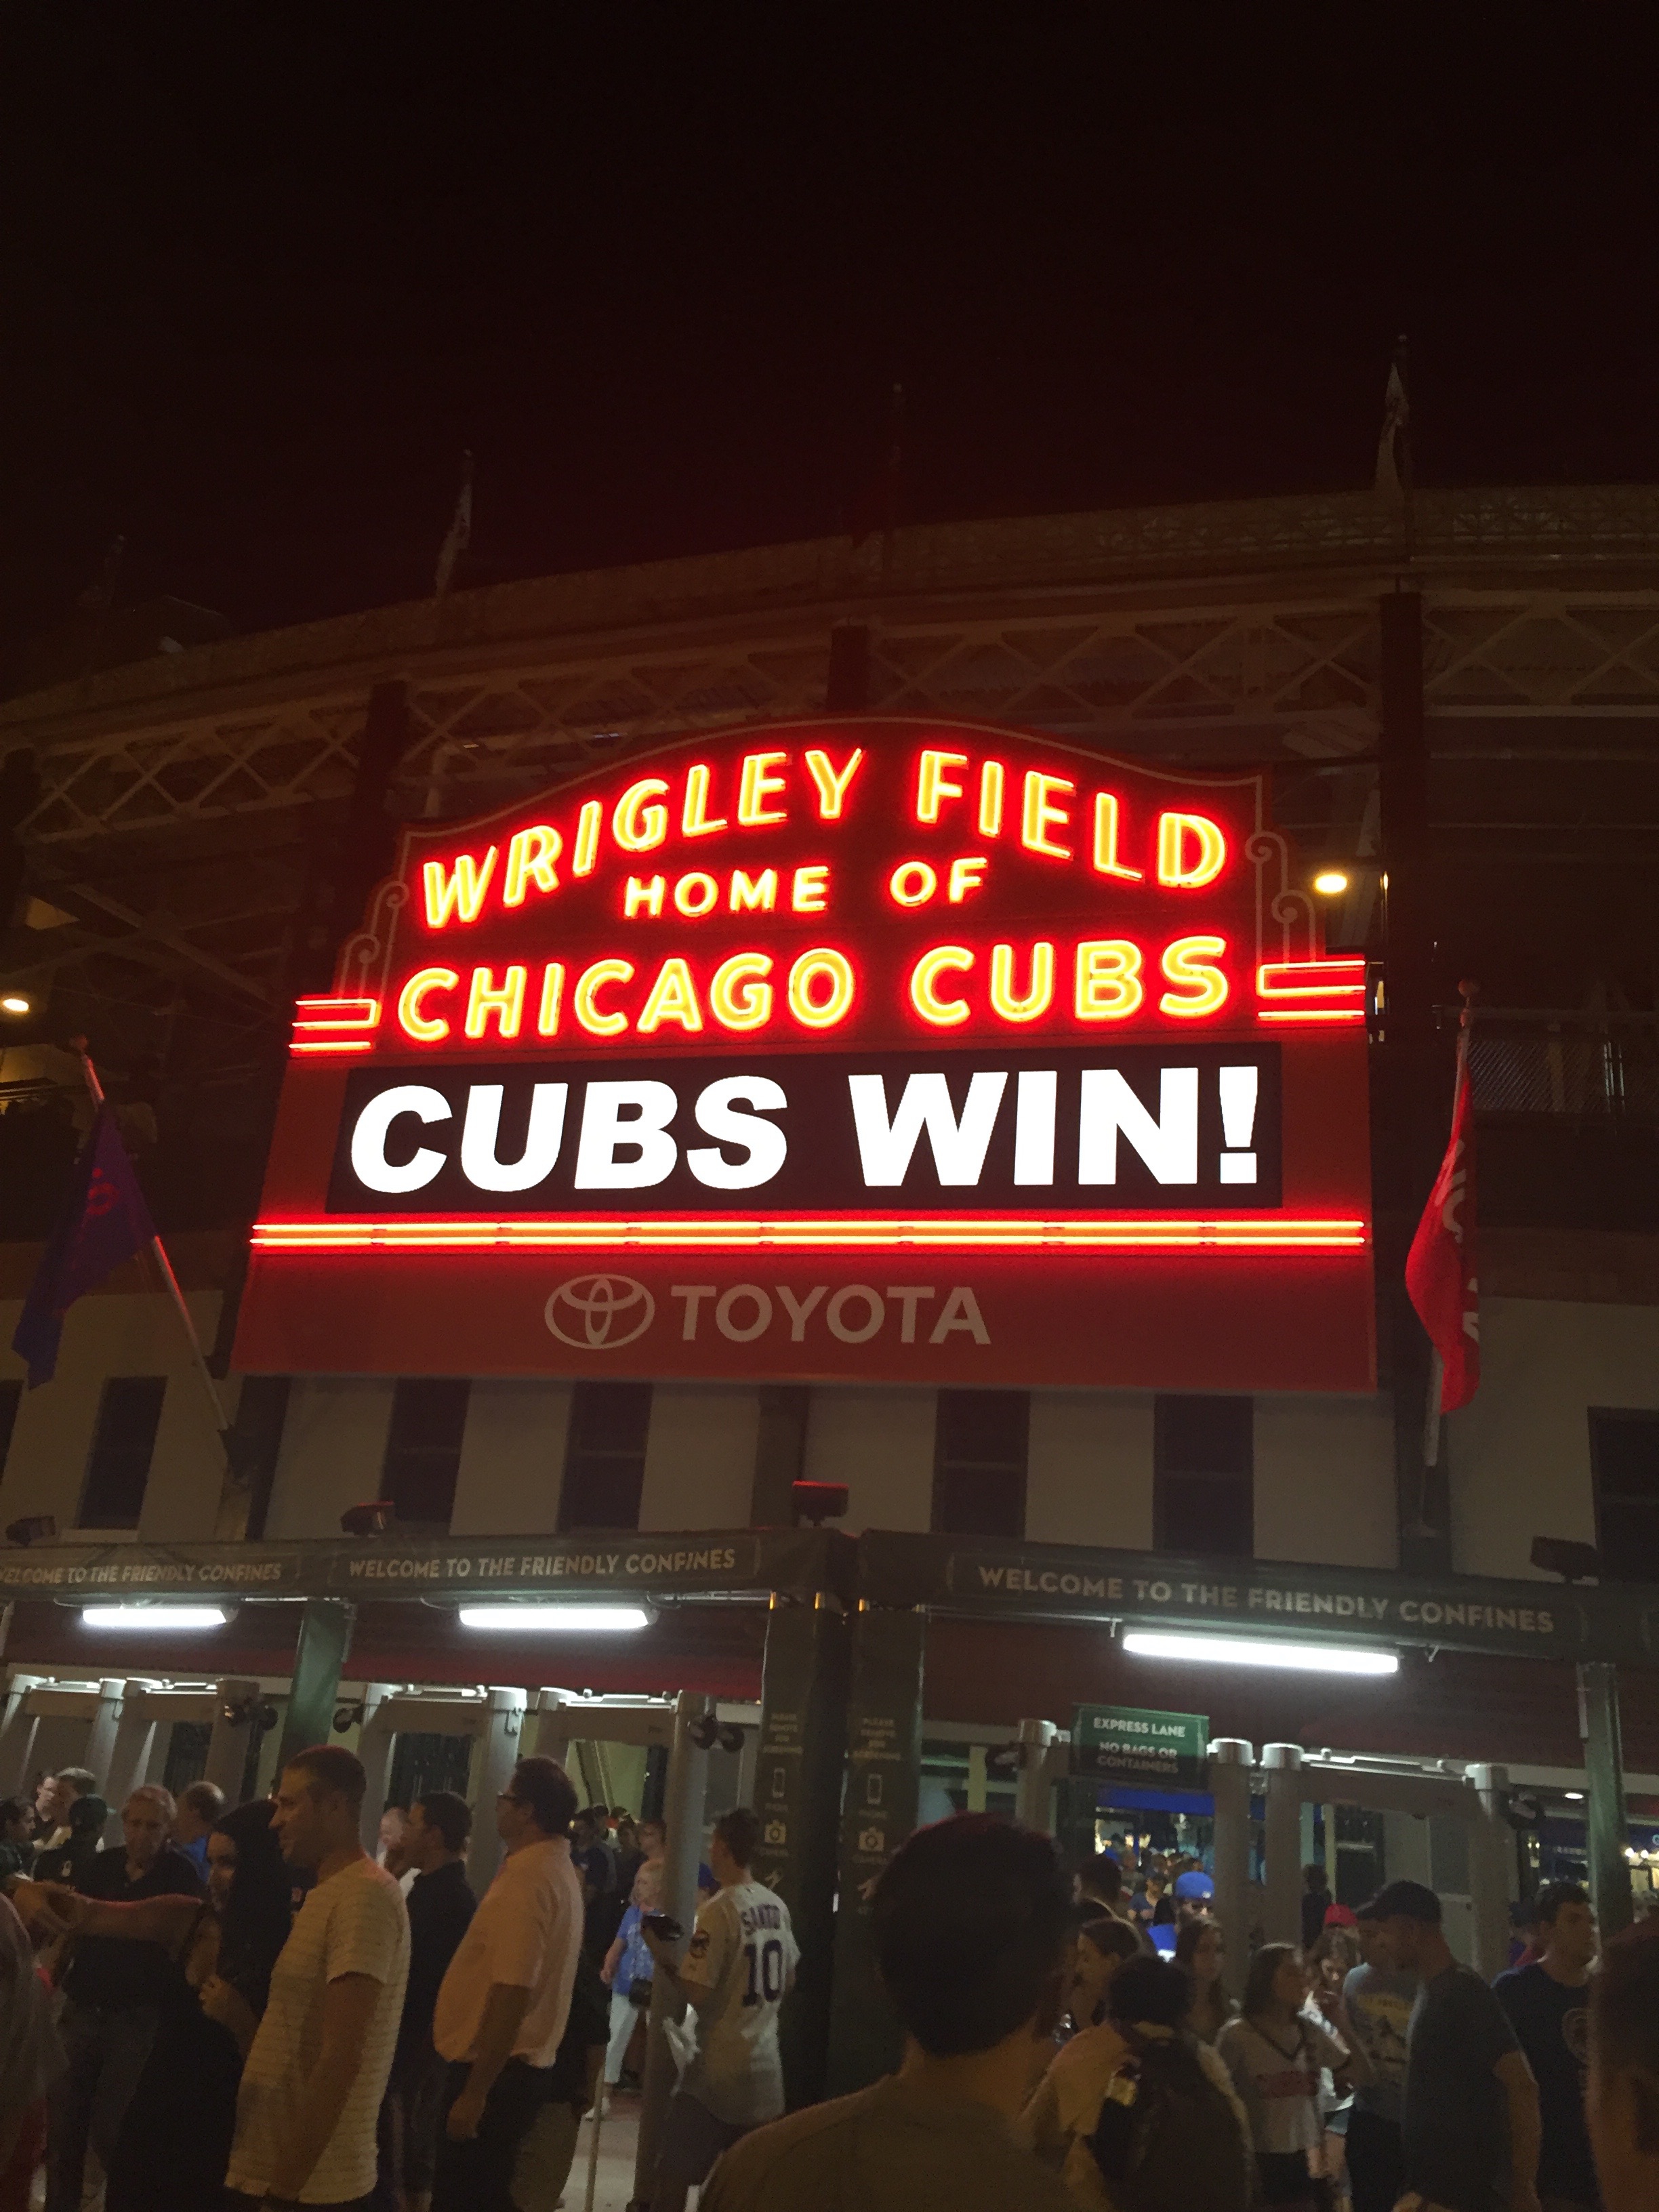 File:Wrigley Field marquee, Cubs Win! (IMG 2680).jpg - Wikimedia Commons